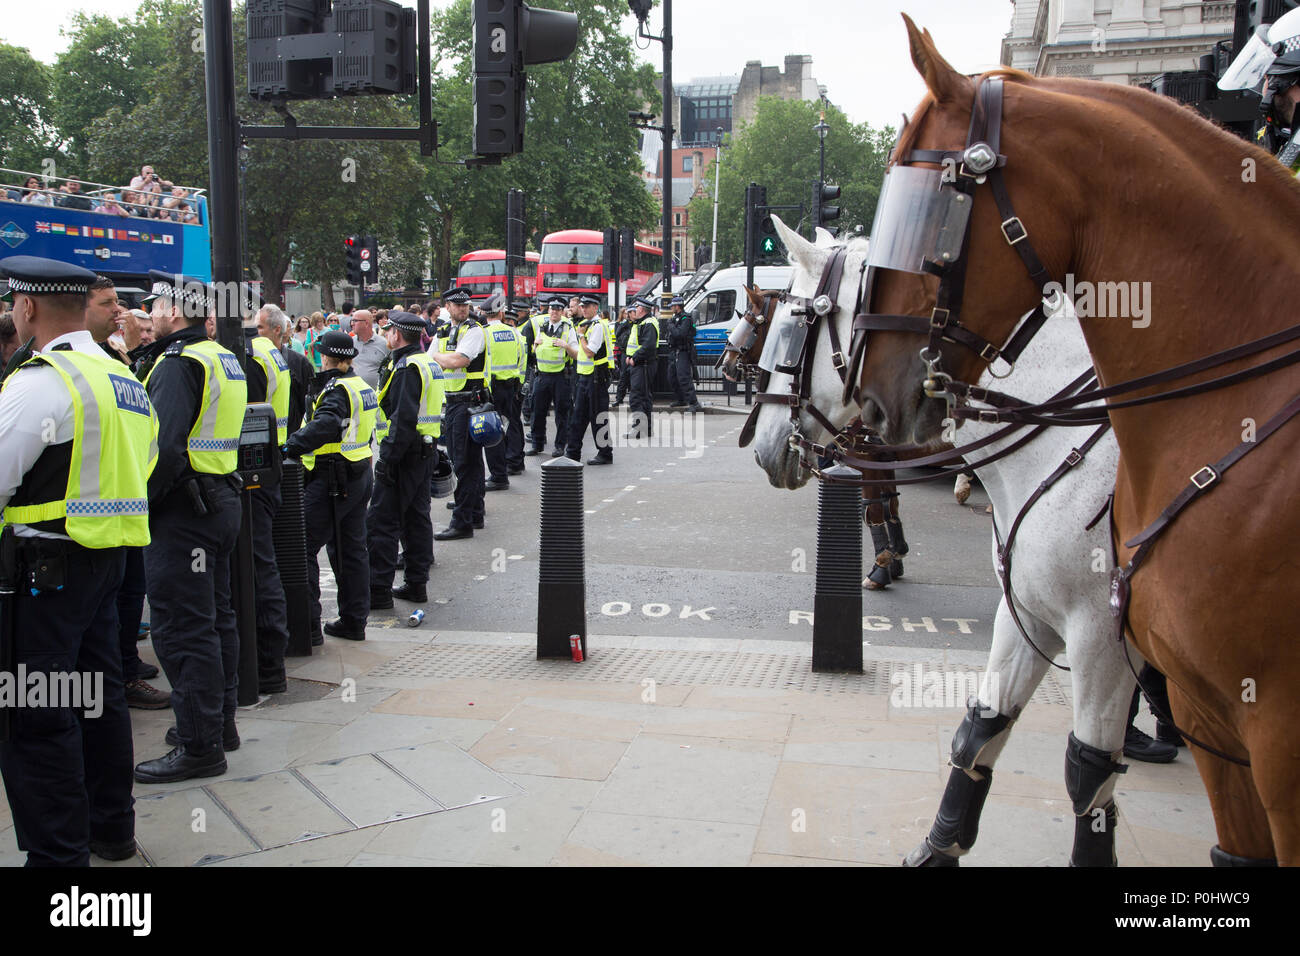 London UK 9th June 2018 Police stand guard as protesters gathered in London to demand the release of English Defense League co-founder Tommy Robinson. Credit: Thabo Jaiyesimi/Alamy Live News Stock Photo